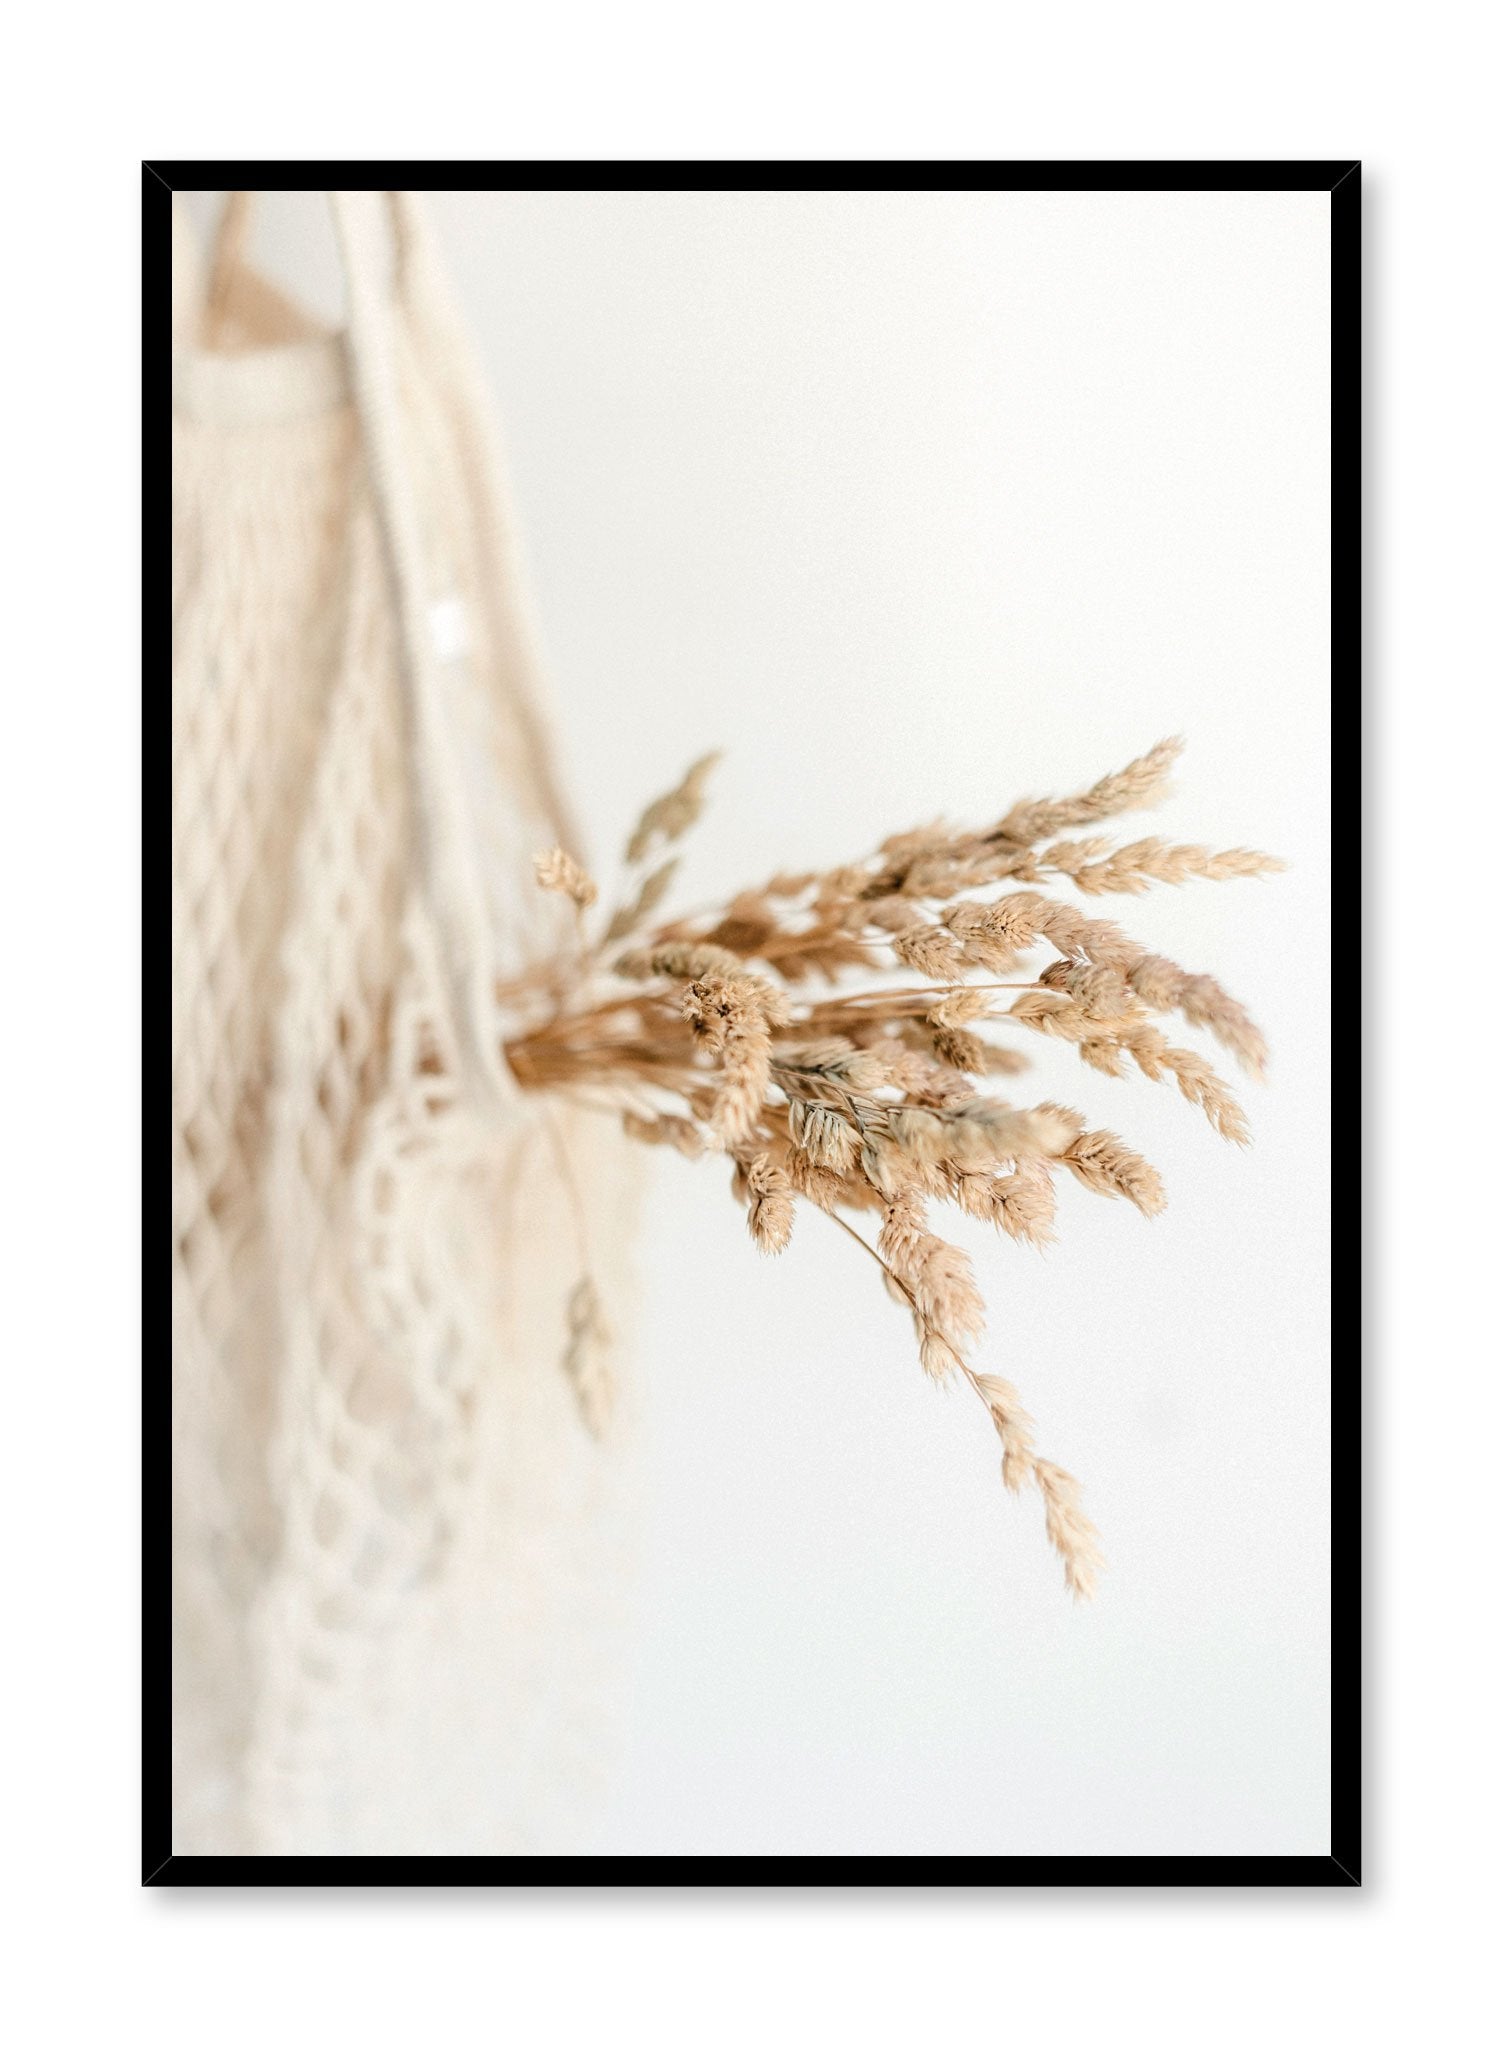 "Everlasting Bouquet" is a botanical photography poster by Opposite Wall of a small dried grasses bouquet harvest in a white cotton mesh bag.